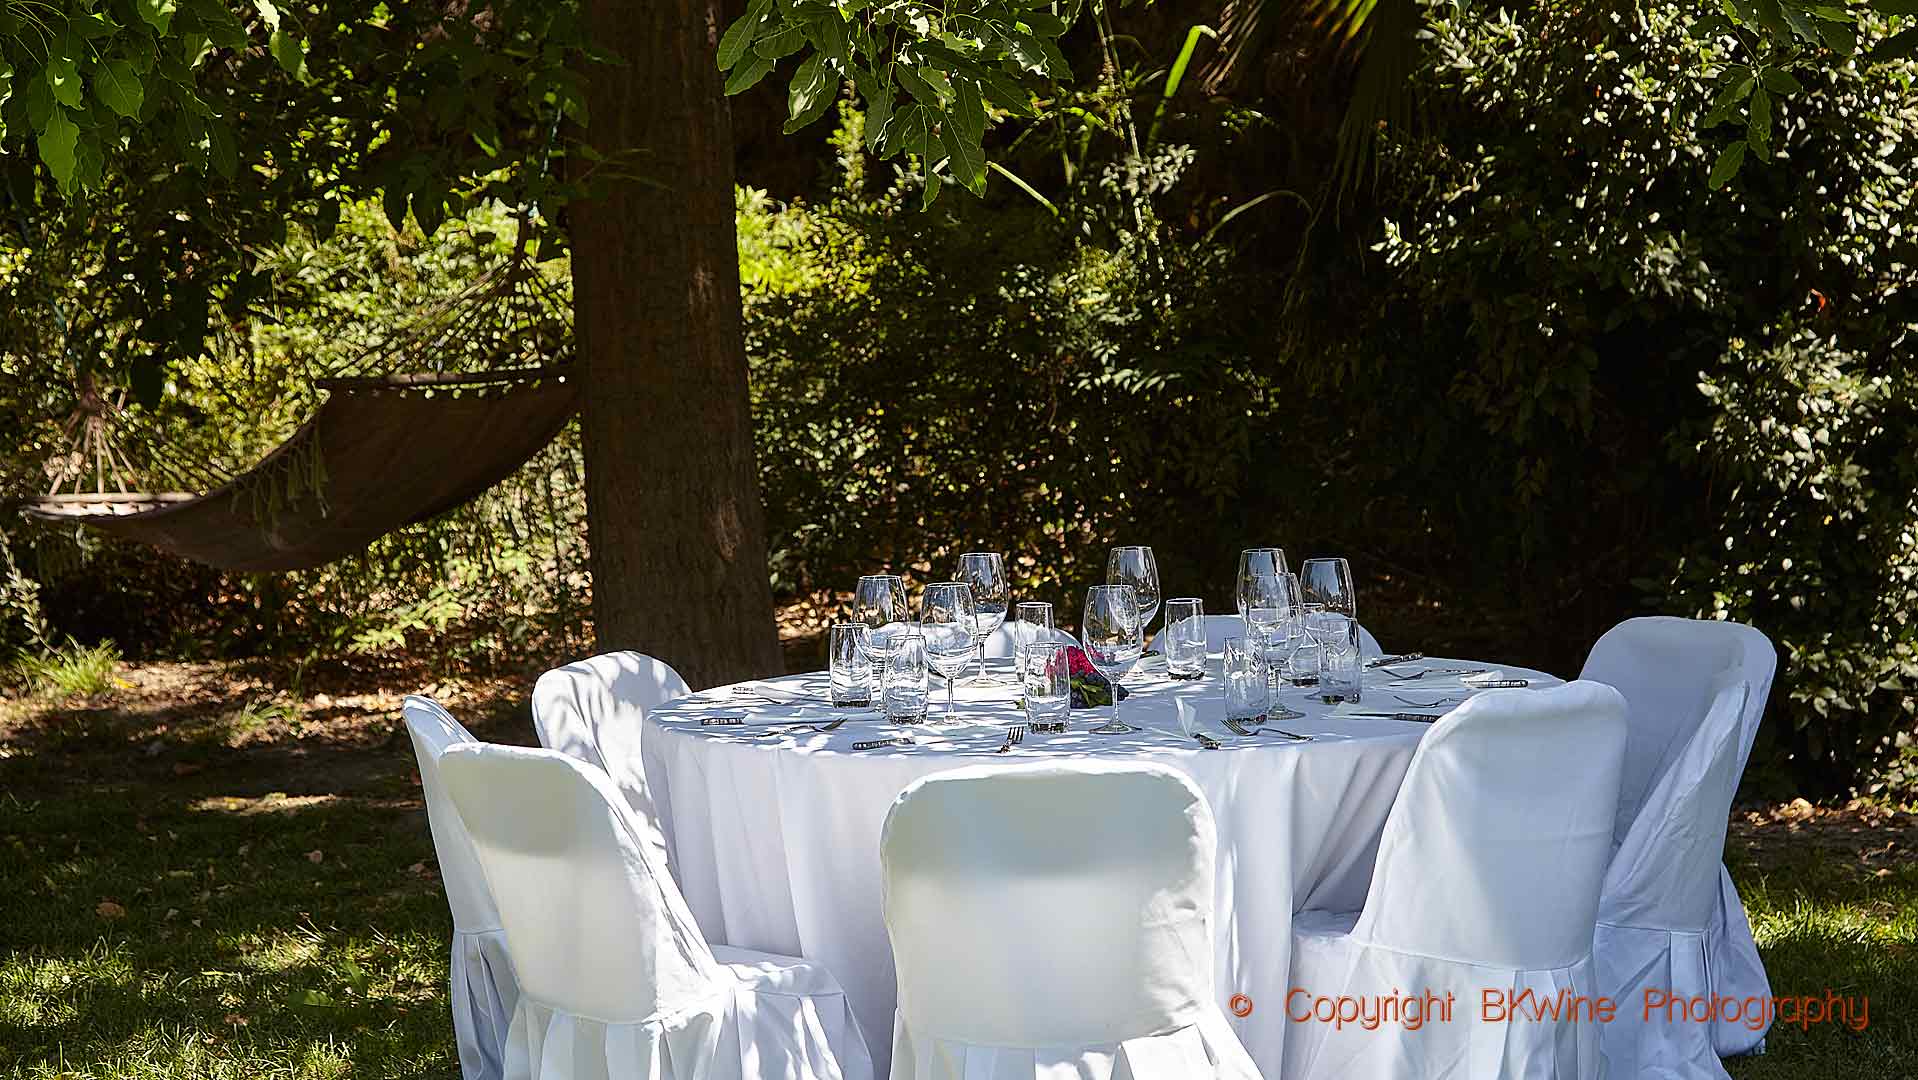 Soon time for lunch in the garden in Chile